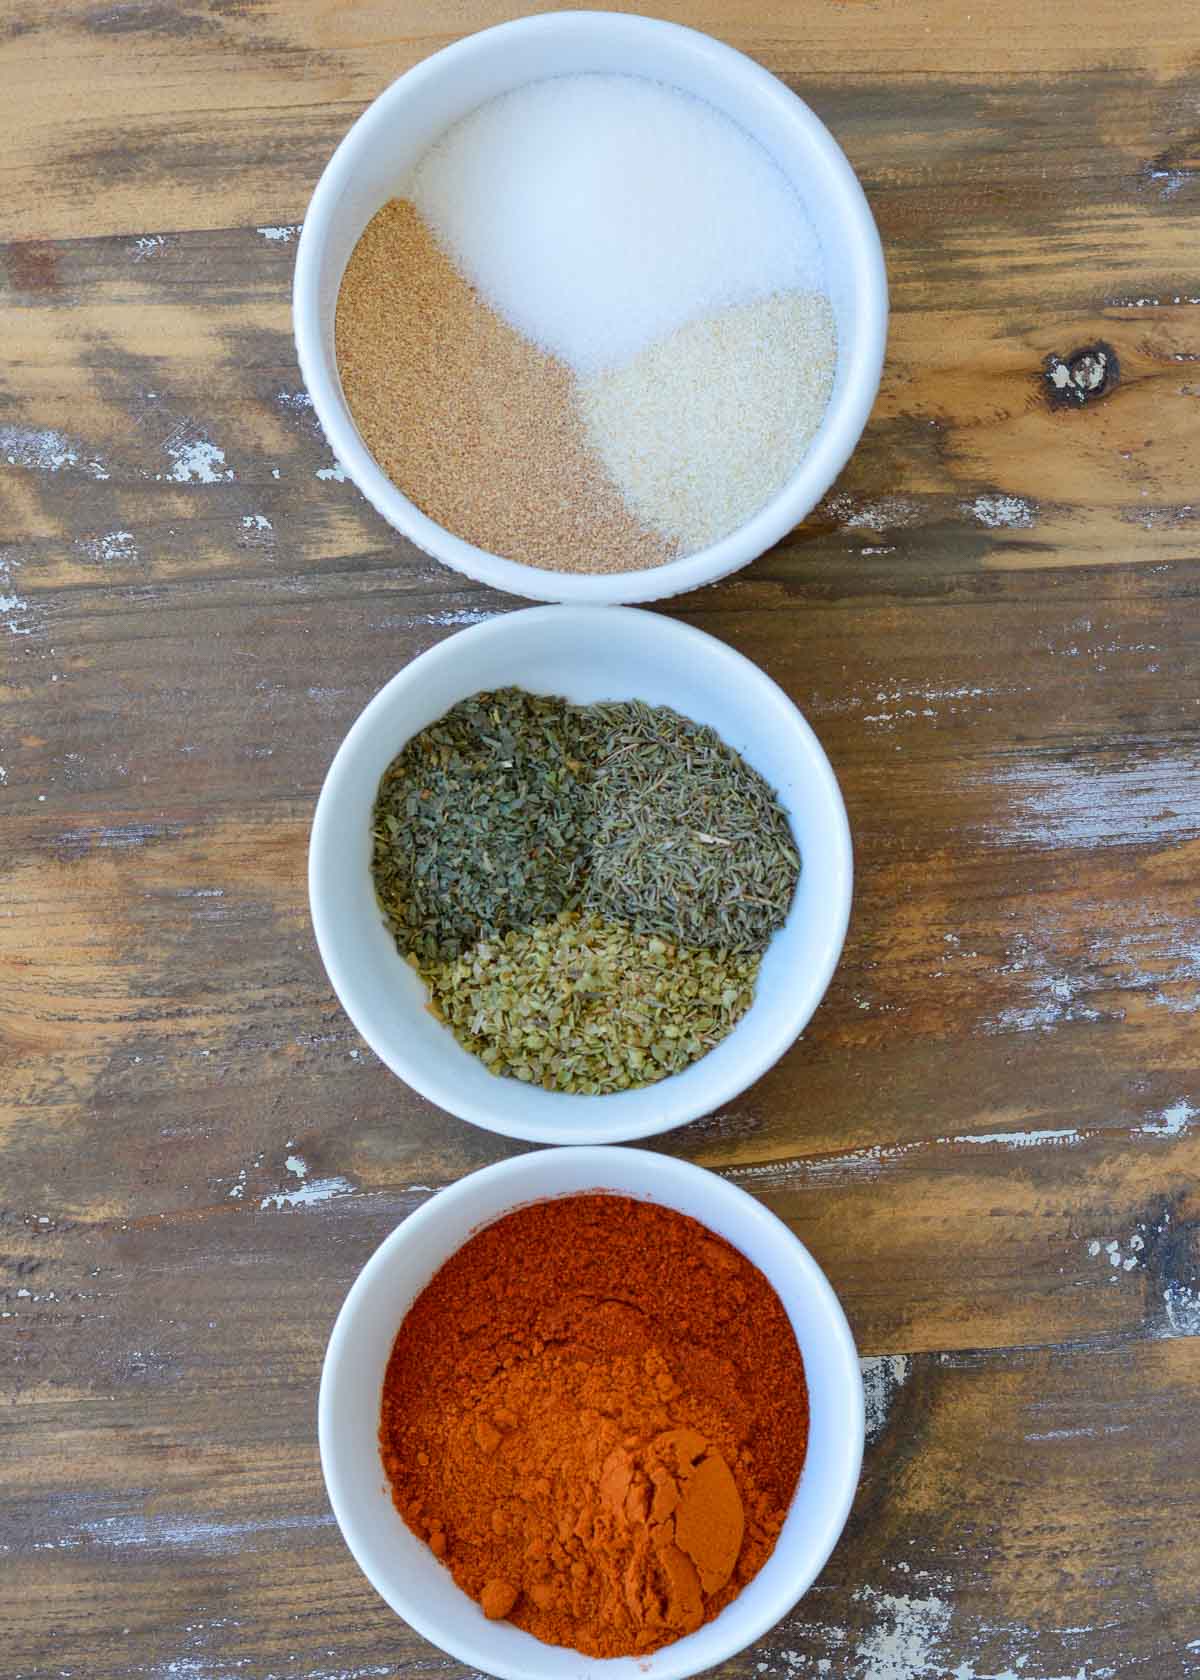 This delicious Homemade Cajun Seasoning Recipe will add the perfect kick to your meals. Achieve spicy or mild Cajun flavor perfect for meat, vegetables, pasta, soups, and more!